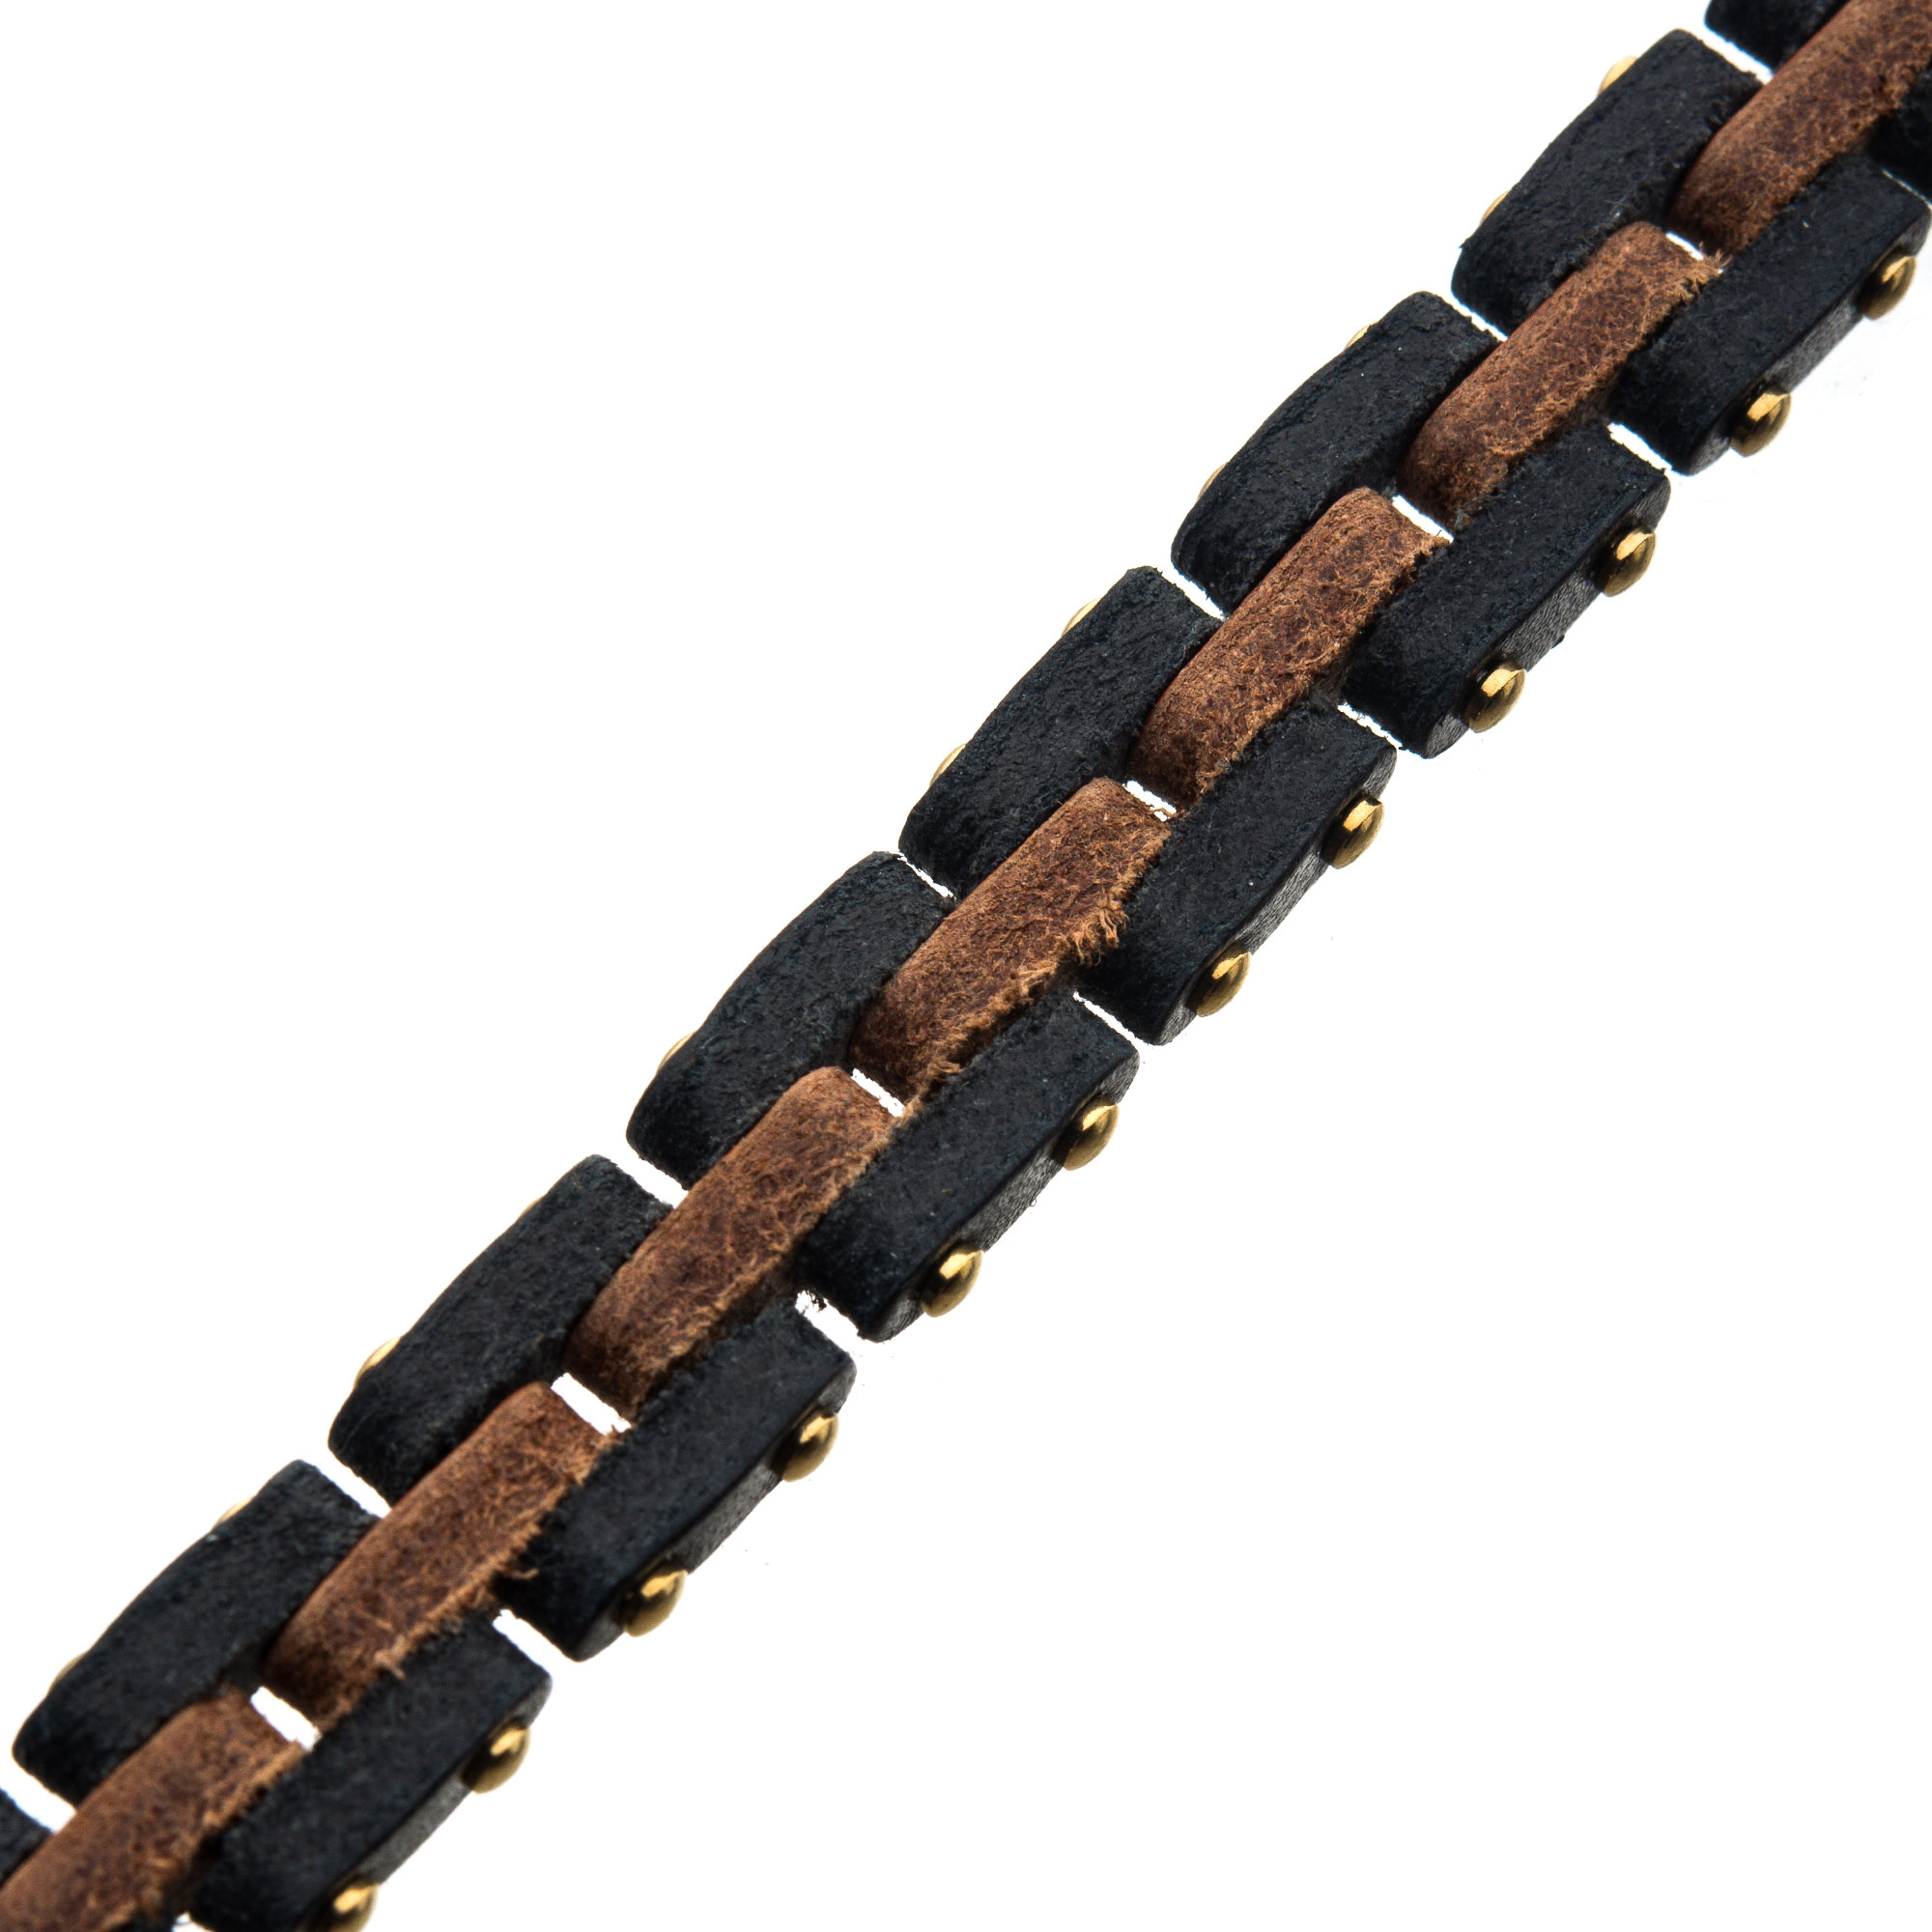 Genuine Leather Link Bracelet with Antiqued Gun Metal Steel Closure Image 2 Enchanted Jewelry Plainfield, CT